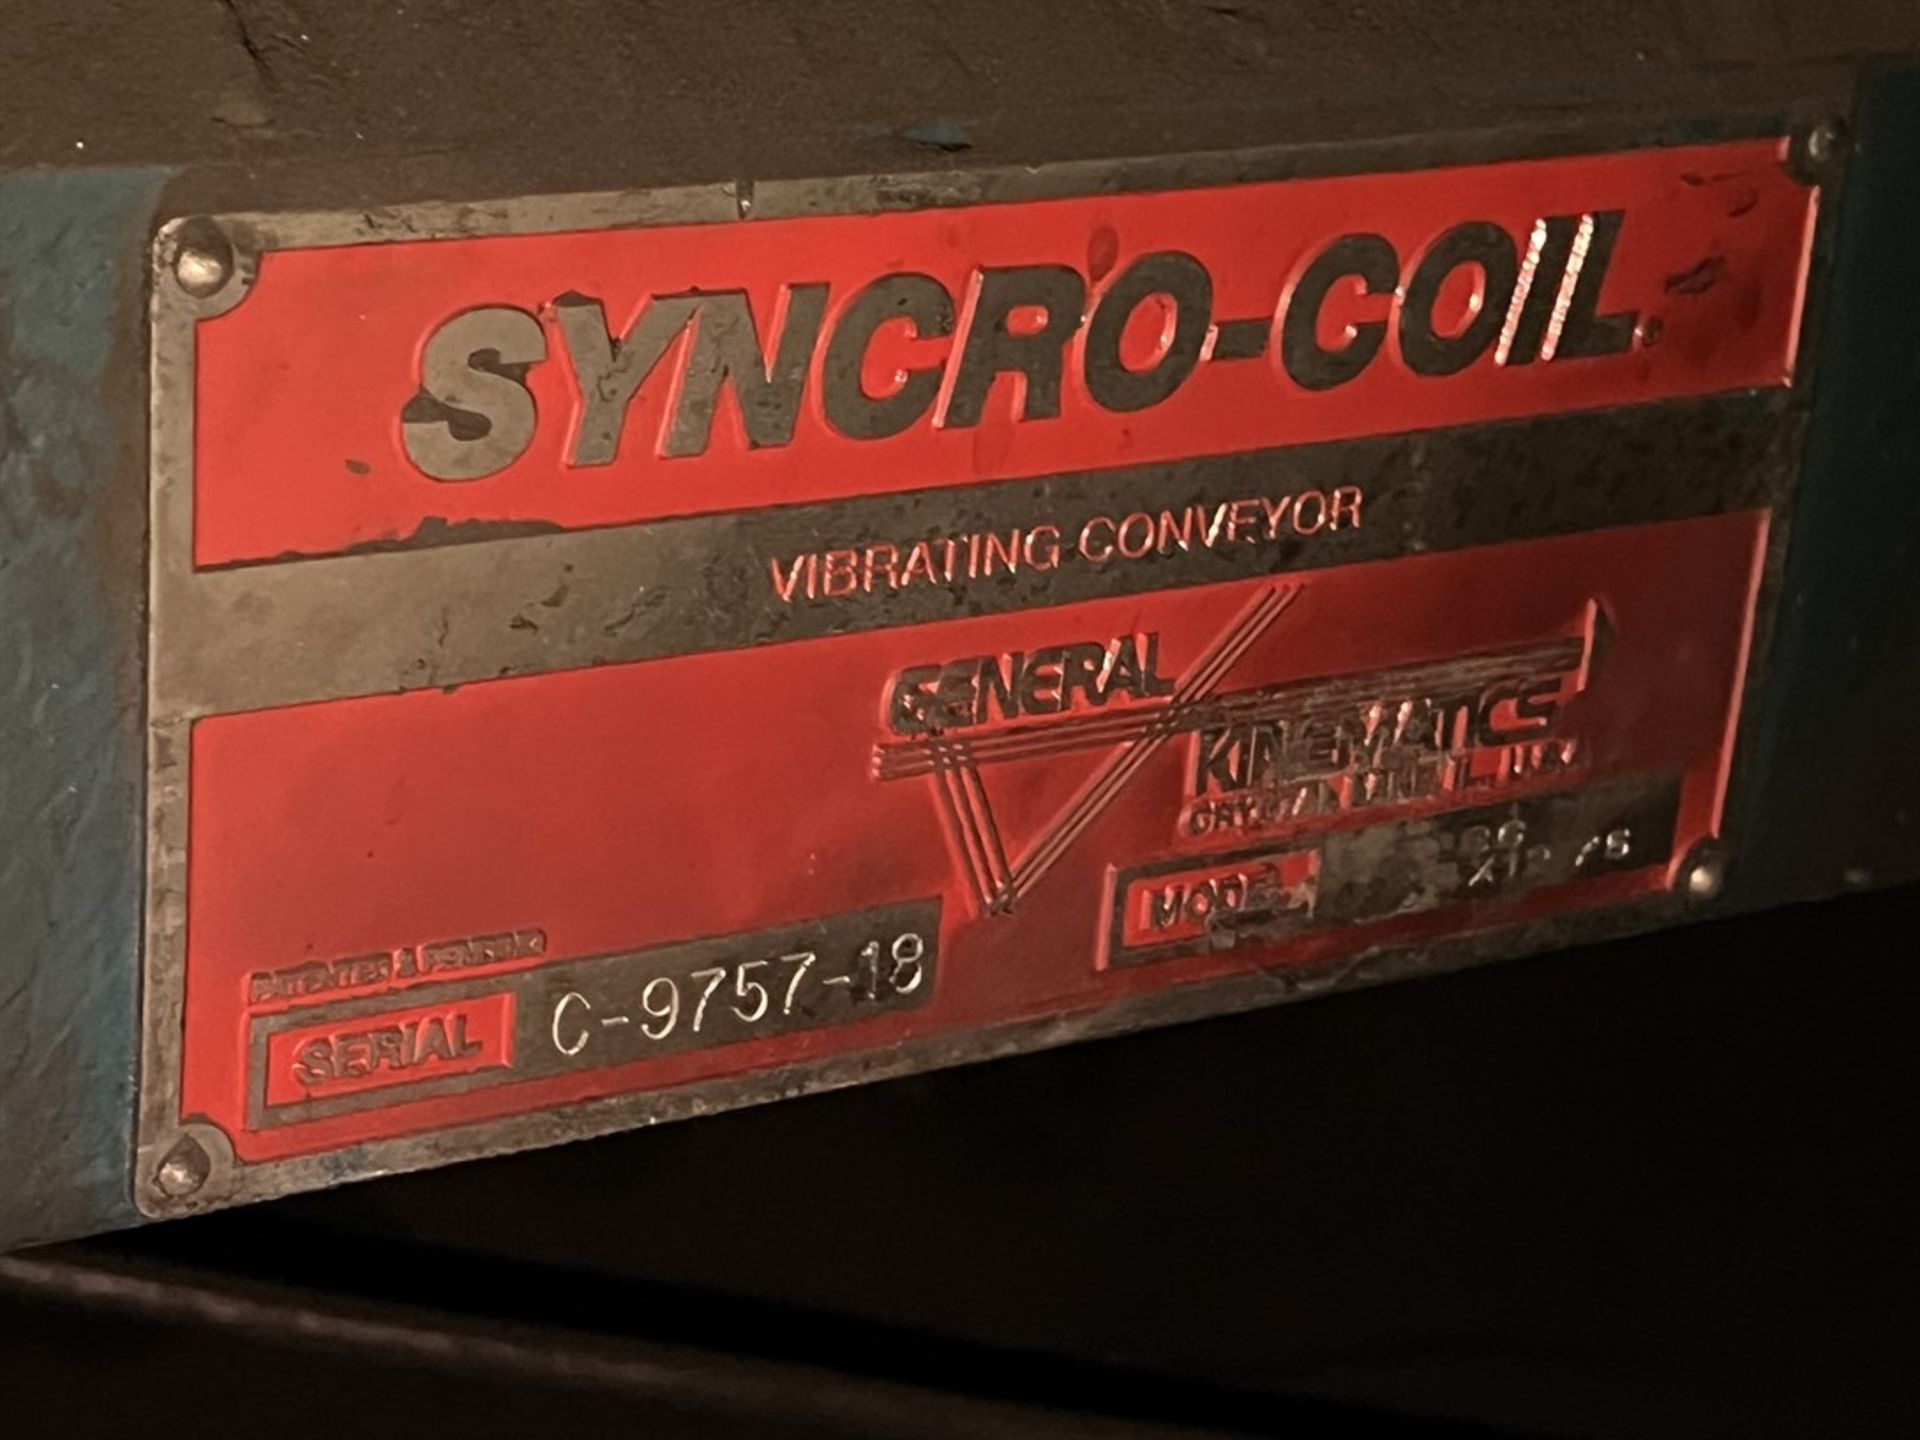 GENERAL KINEMATICS Syncro-Coil 10X44X12.75 Tube Shaker Vibrating Conveyor, s/n C-9757-18 - Image 3 of 5